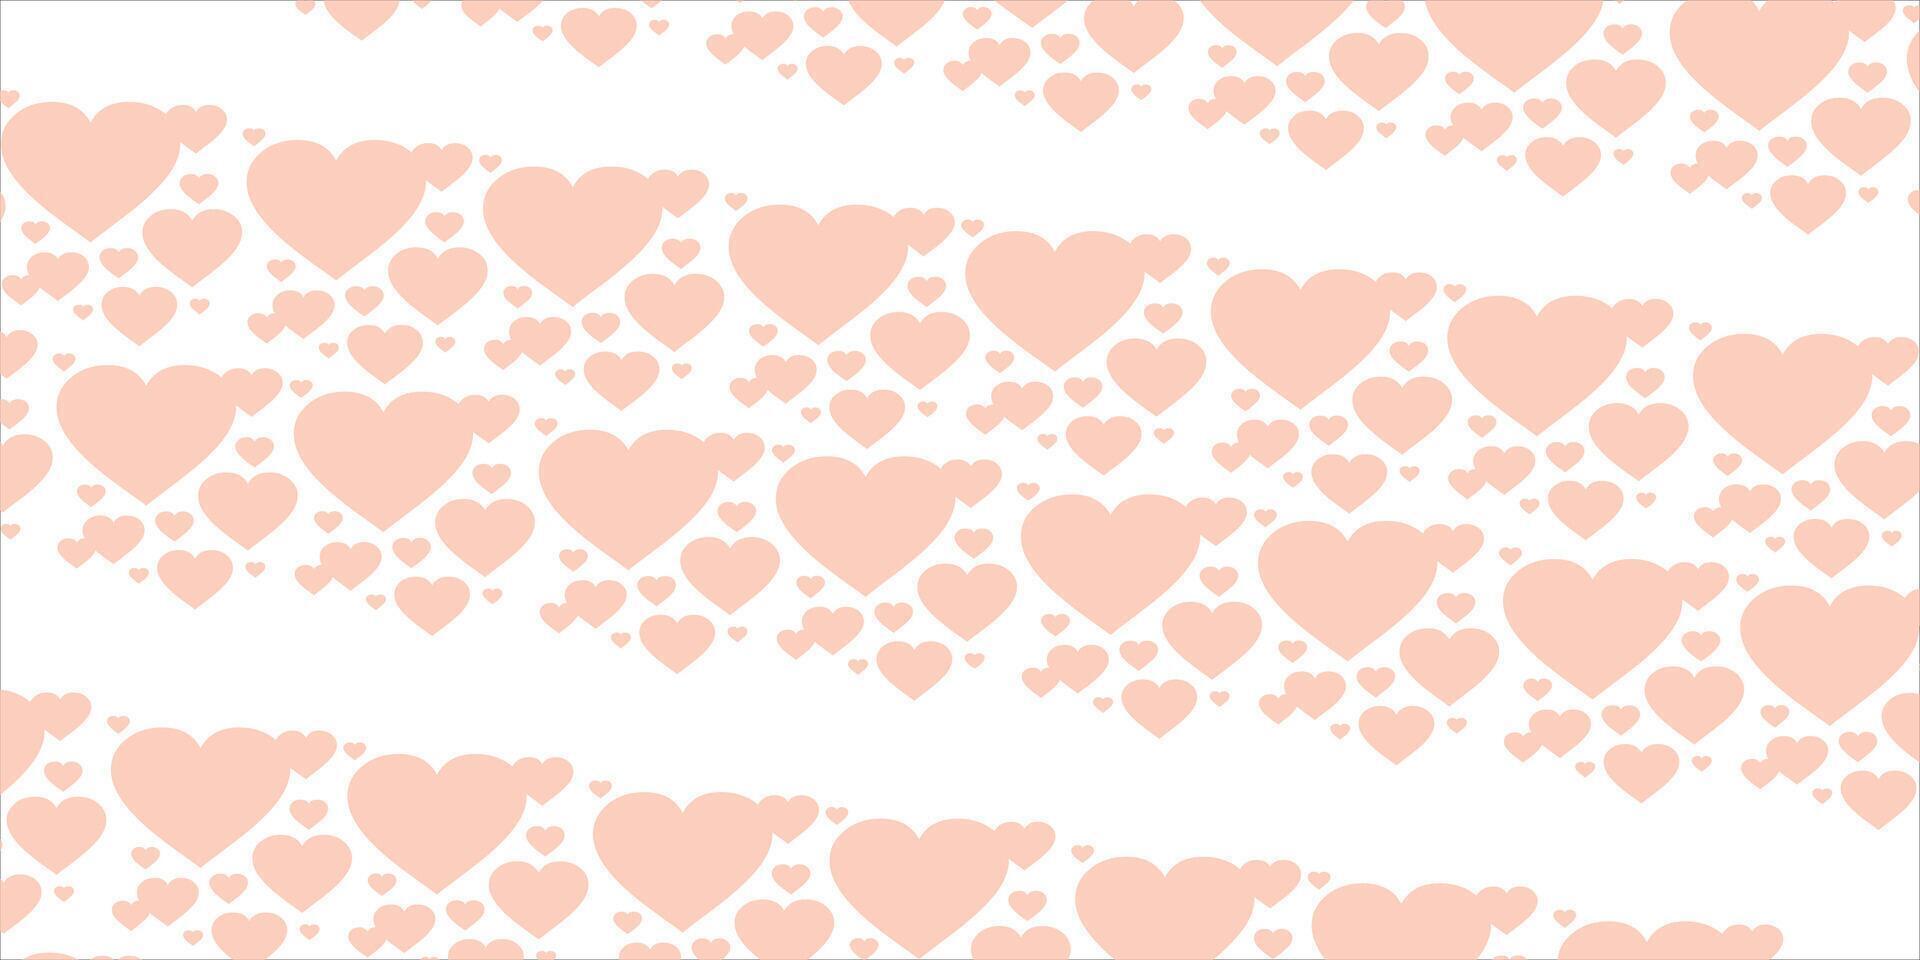 Cute love heart seamless pattern illustration. Cute romantic pink hearts background print. Valentine's day holiday backdrop texture design. vector